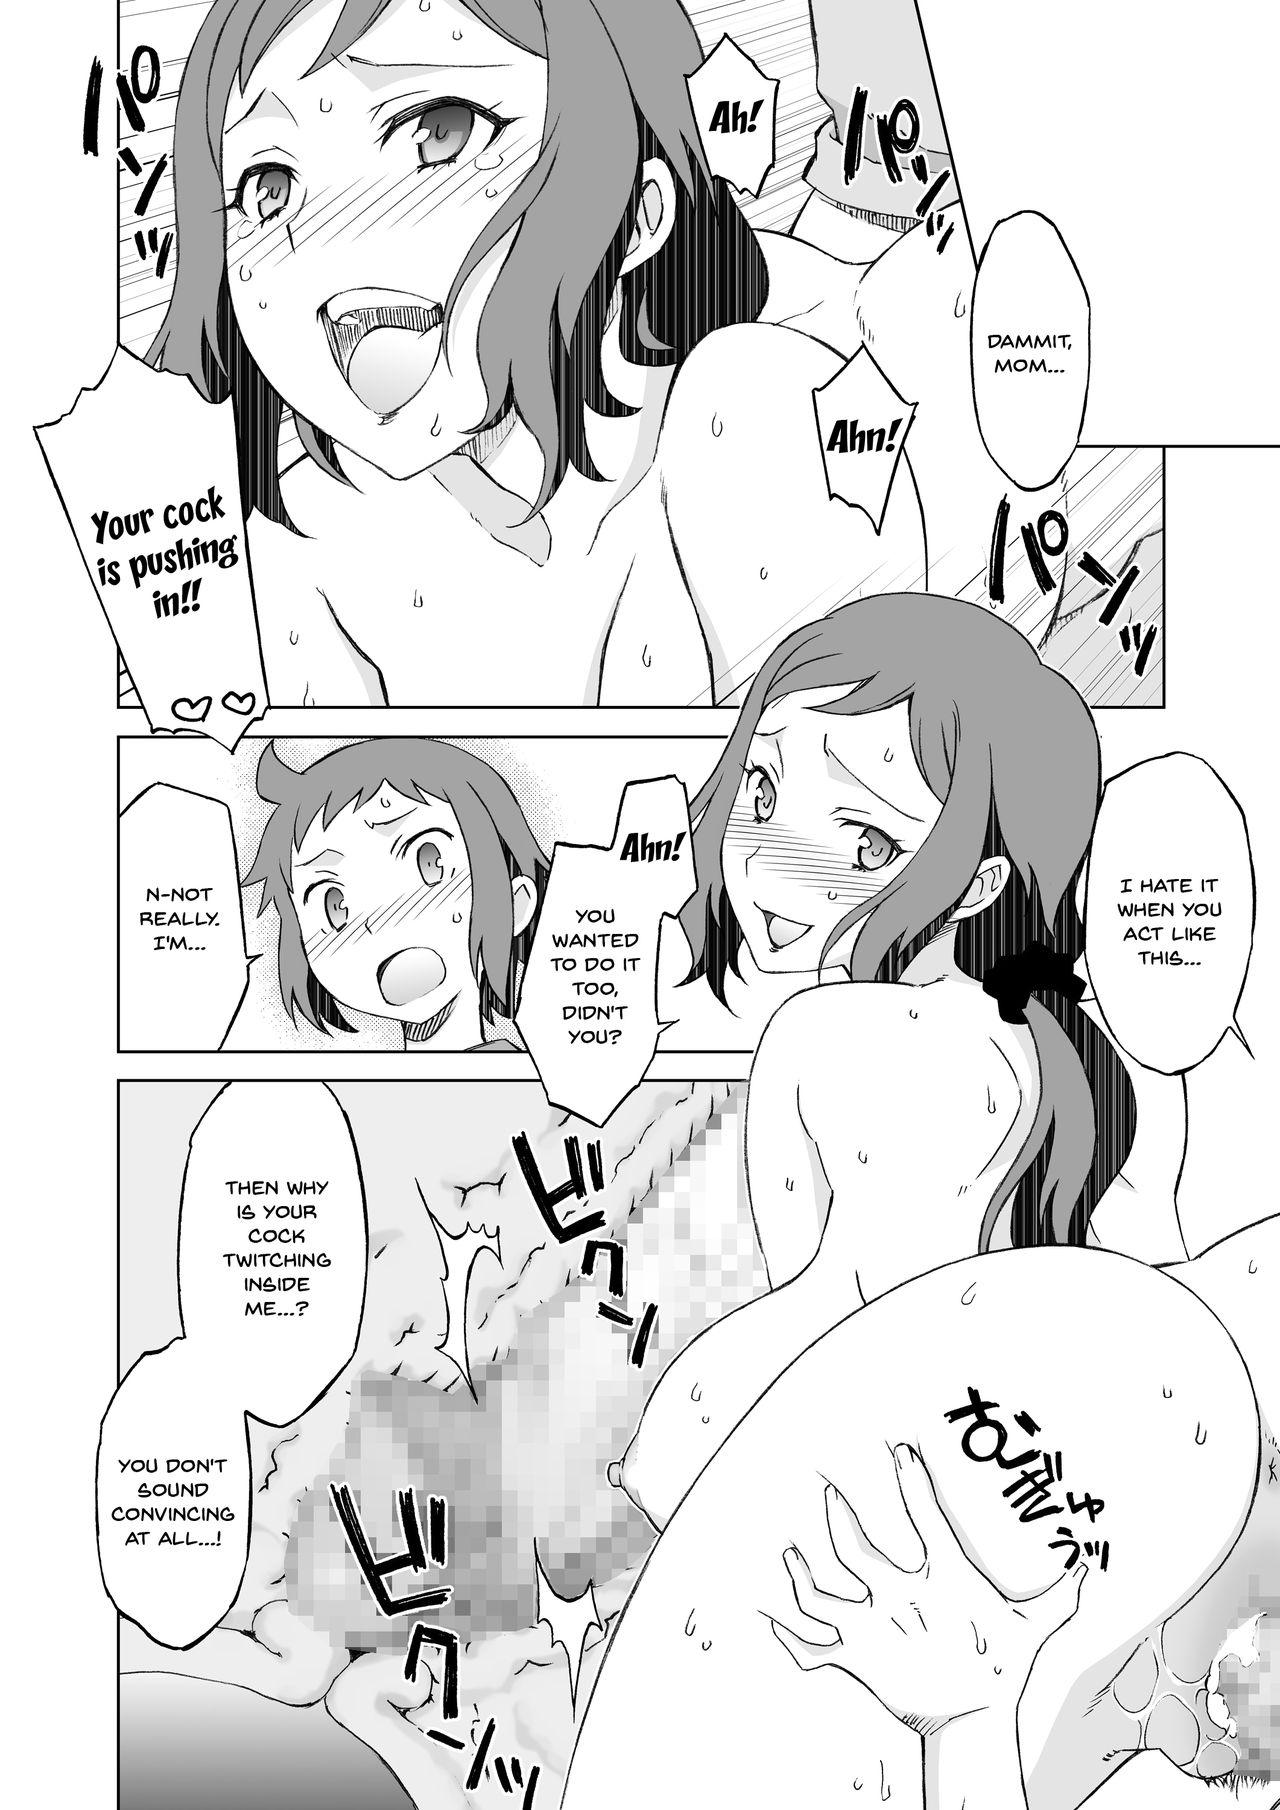 Gay Outinpublic Build Fuckers 2 - Gundam build fighters Gostosa - Page 6